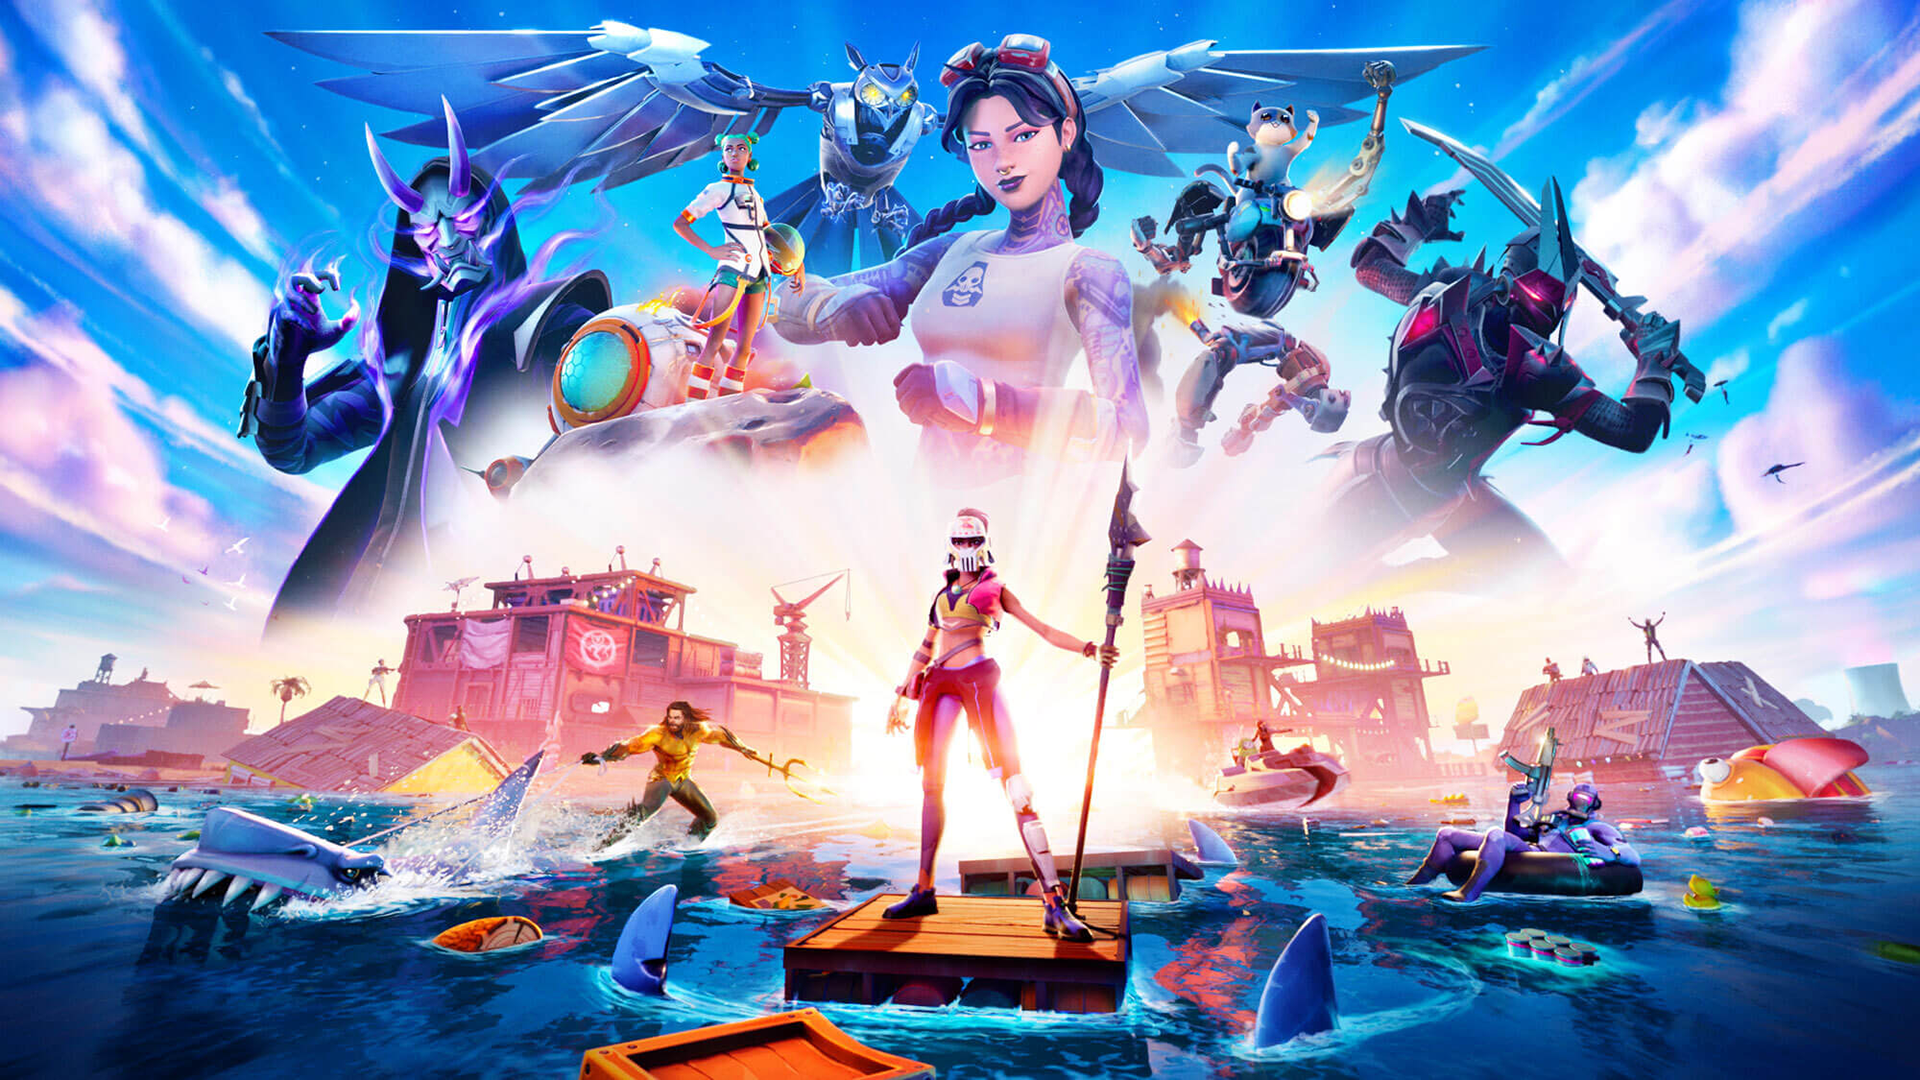 Fortnite map, Battle Pass, mythic weapons, Aquaman skin & more to